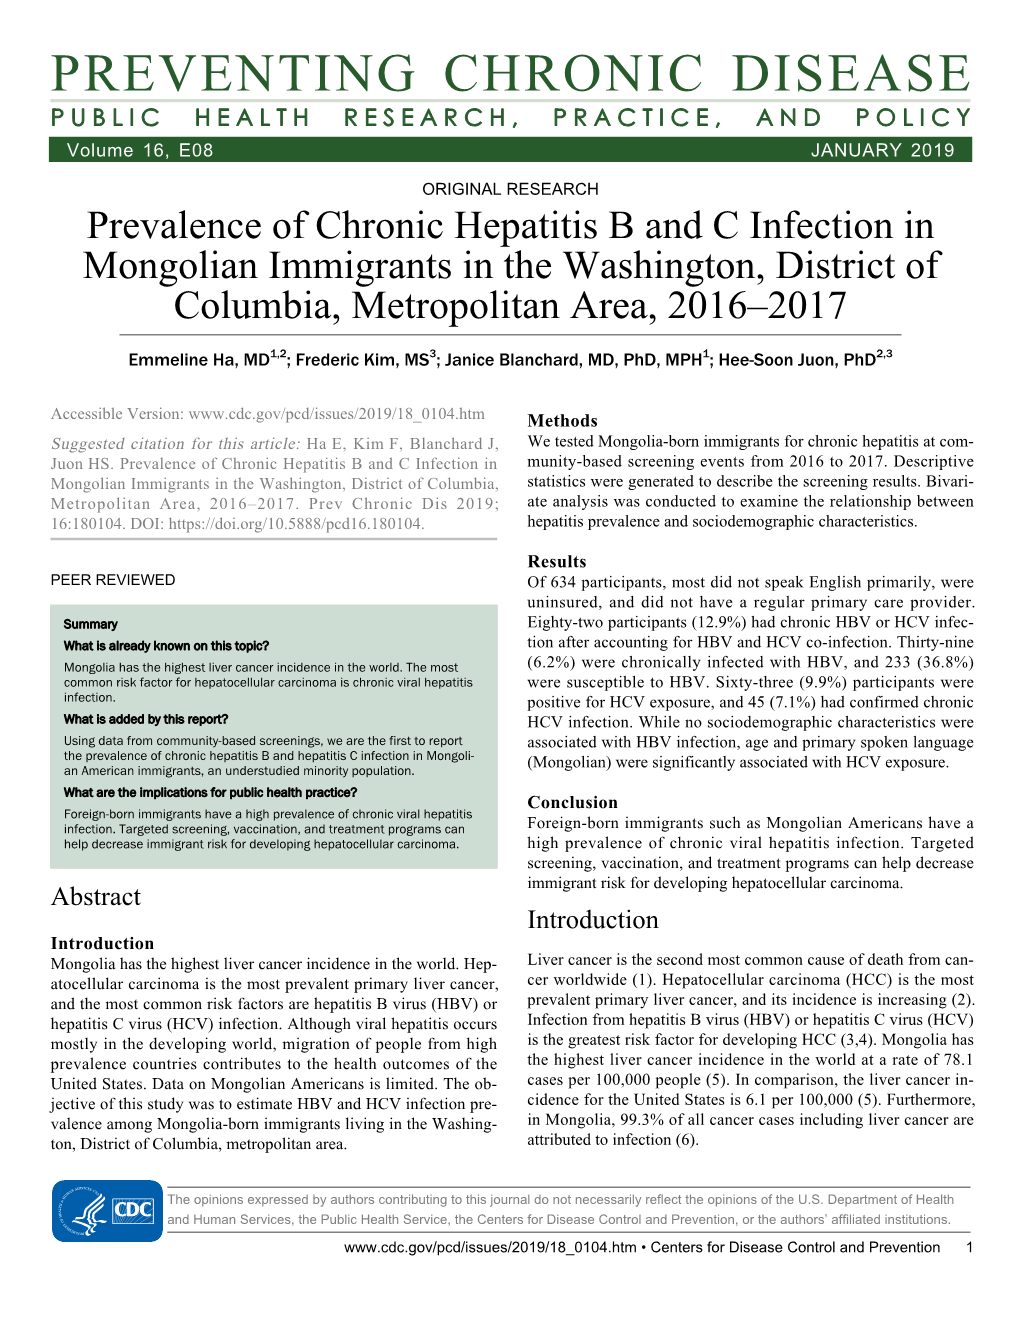 Prevalence of Chronic Hepatitis B and C Infection in Mongolian Immigrants in the Washington, District of Columbia, Metropolitan Area, 2016–2017